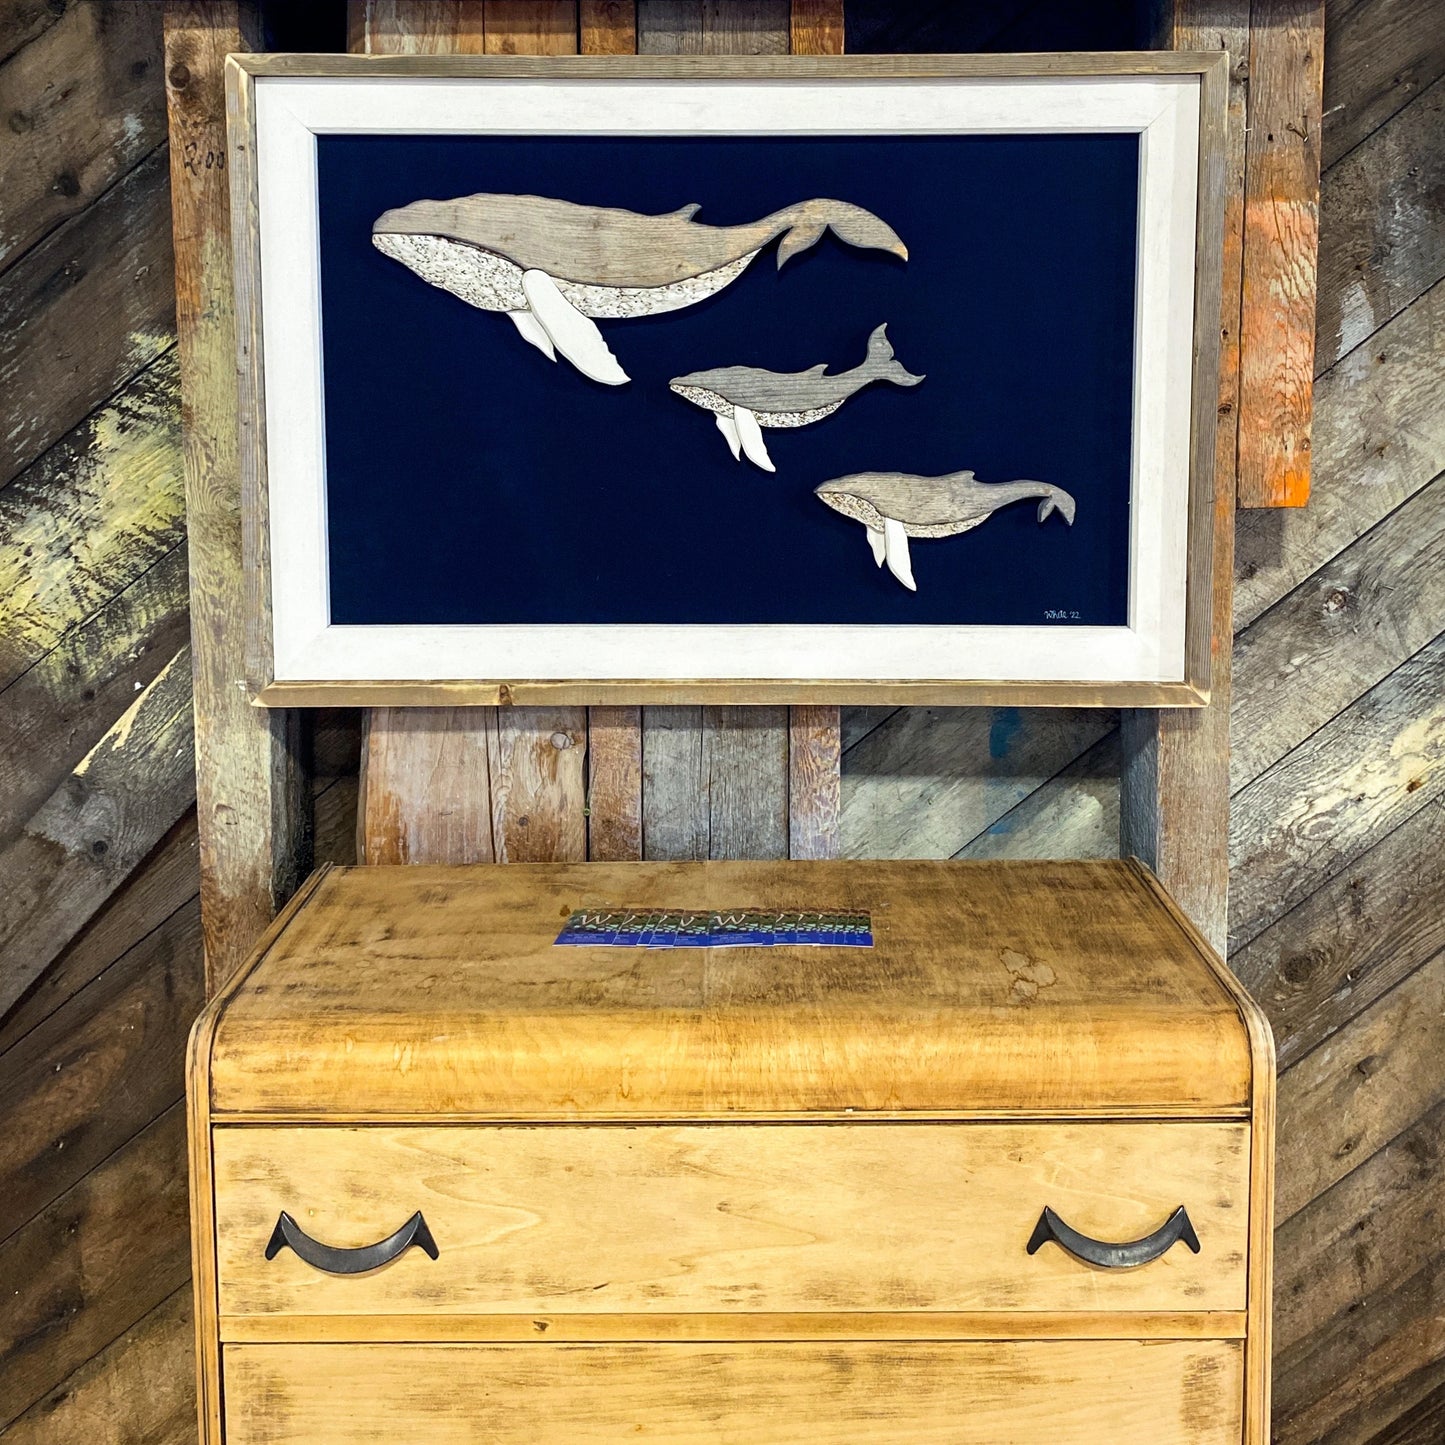 The White's Emporium's driftwood art piece features three humpback whales, a mother and 2 calves, made from reclaimed wood and driftwood sourced in Newfoundland.